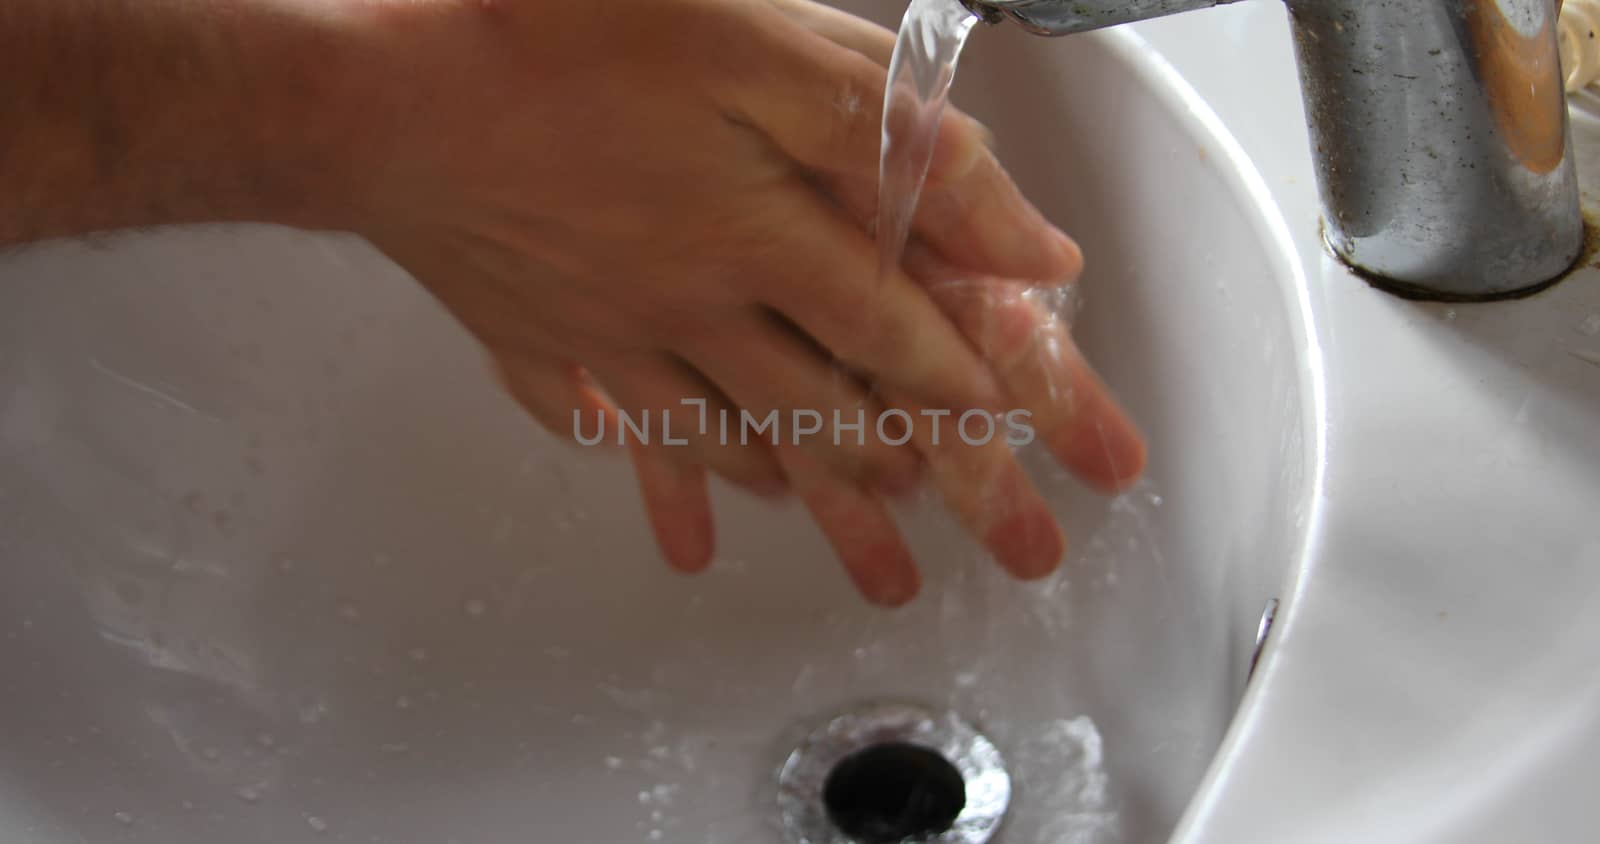 Man washes his hands thoroughly in the sink